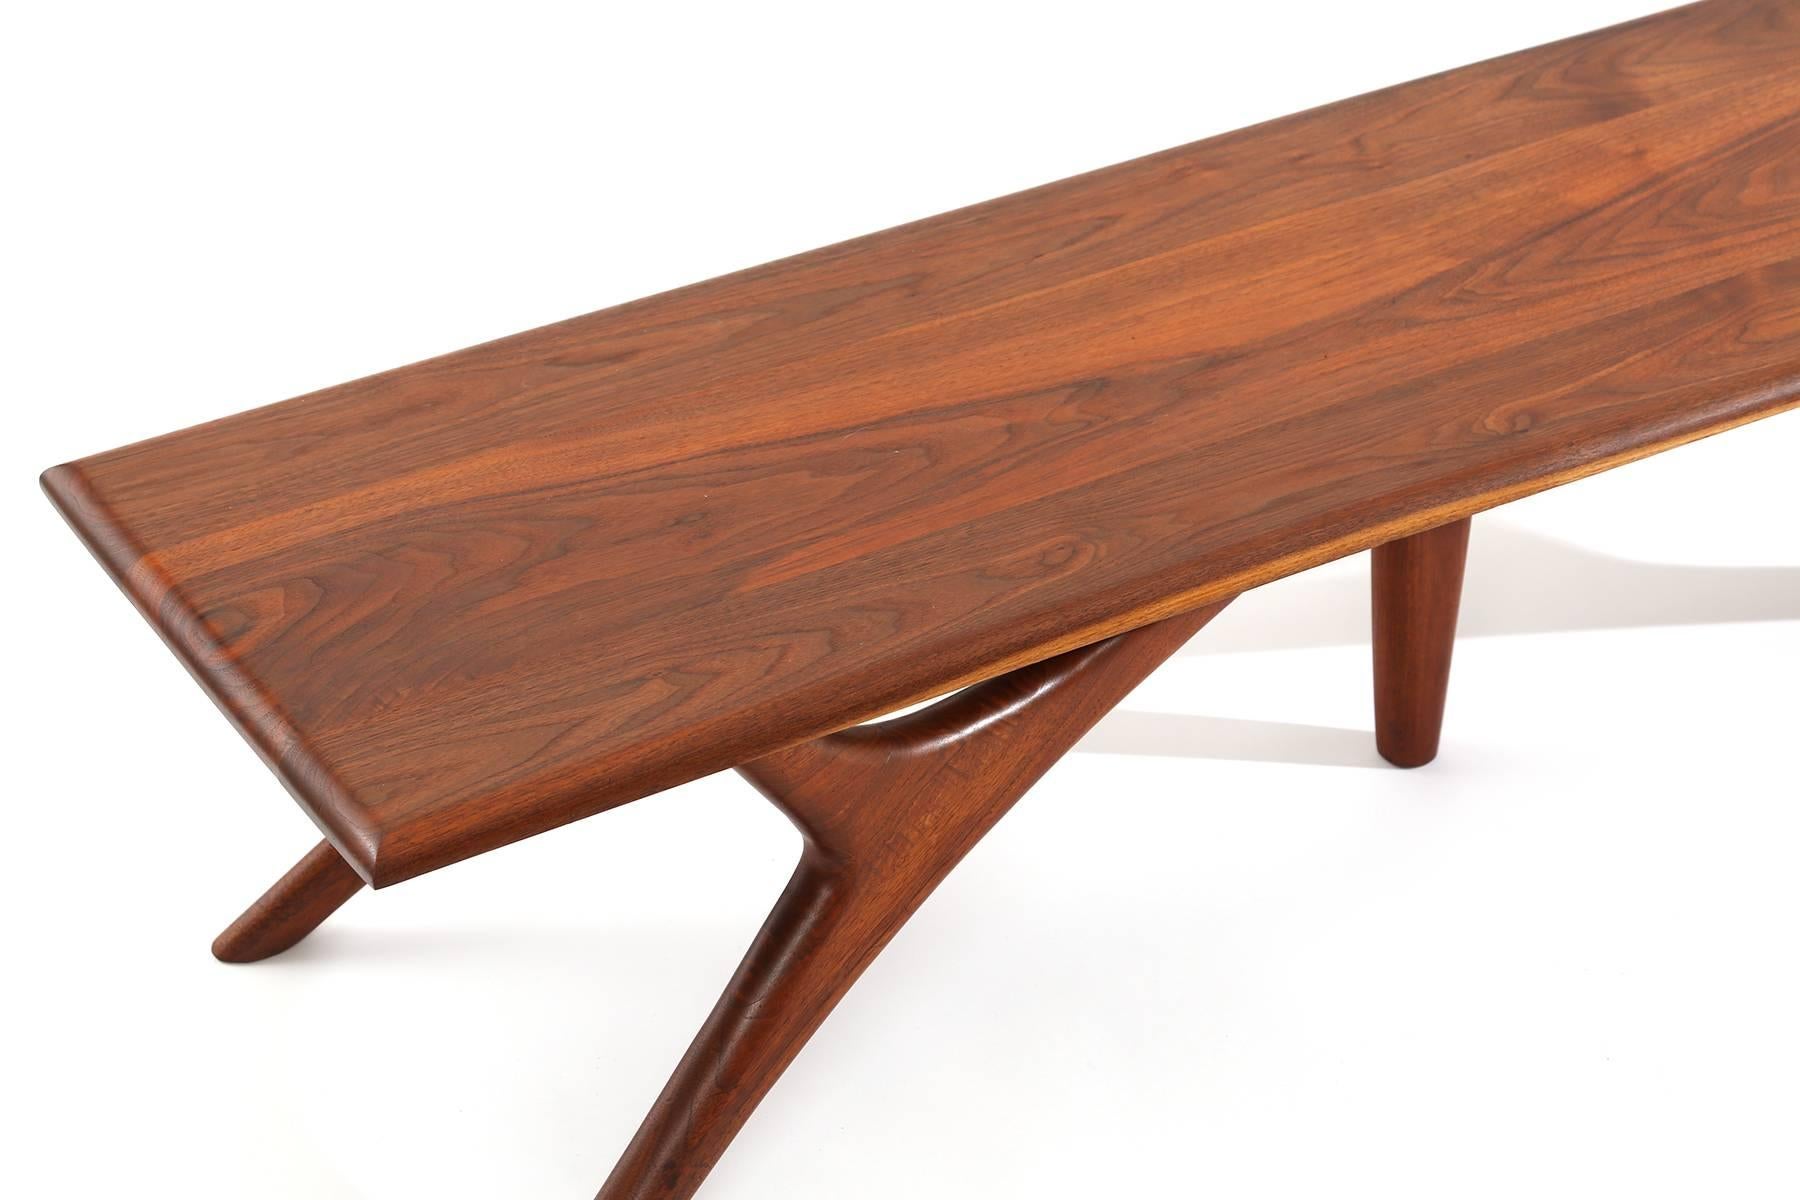 Sculptural solid walnut cocktail table circa early 1950s. This example has beautifully tapered and formed legs with lovely graining to the solid walnut top.